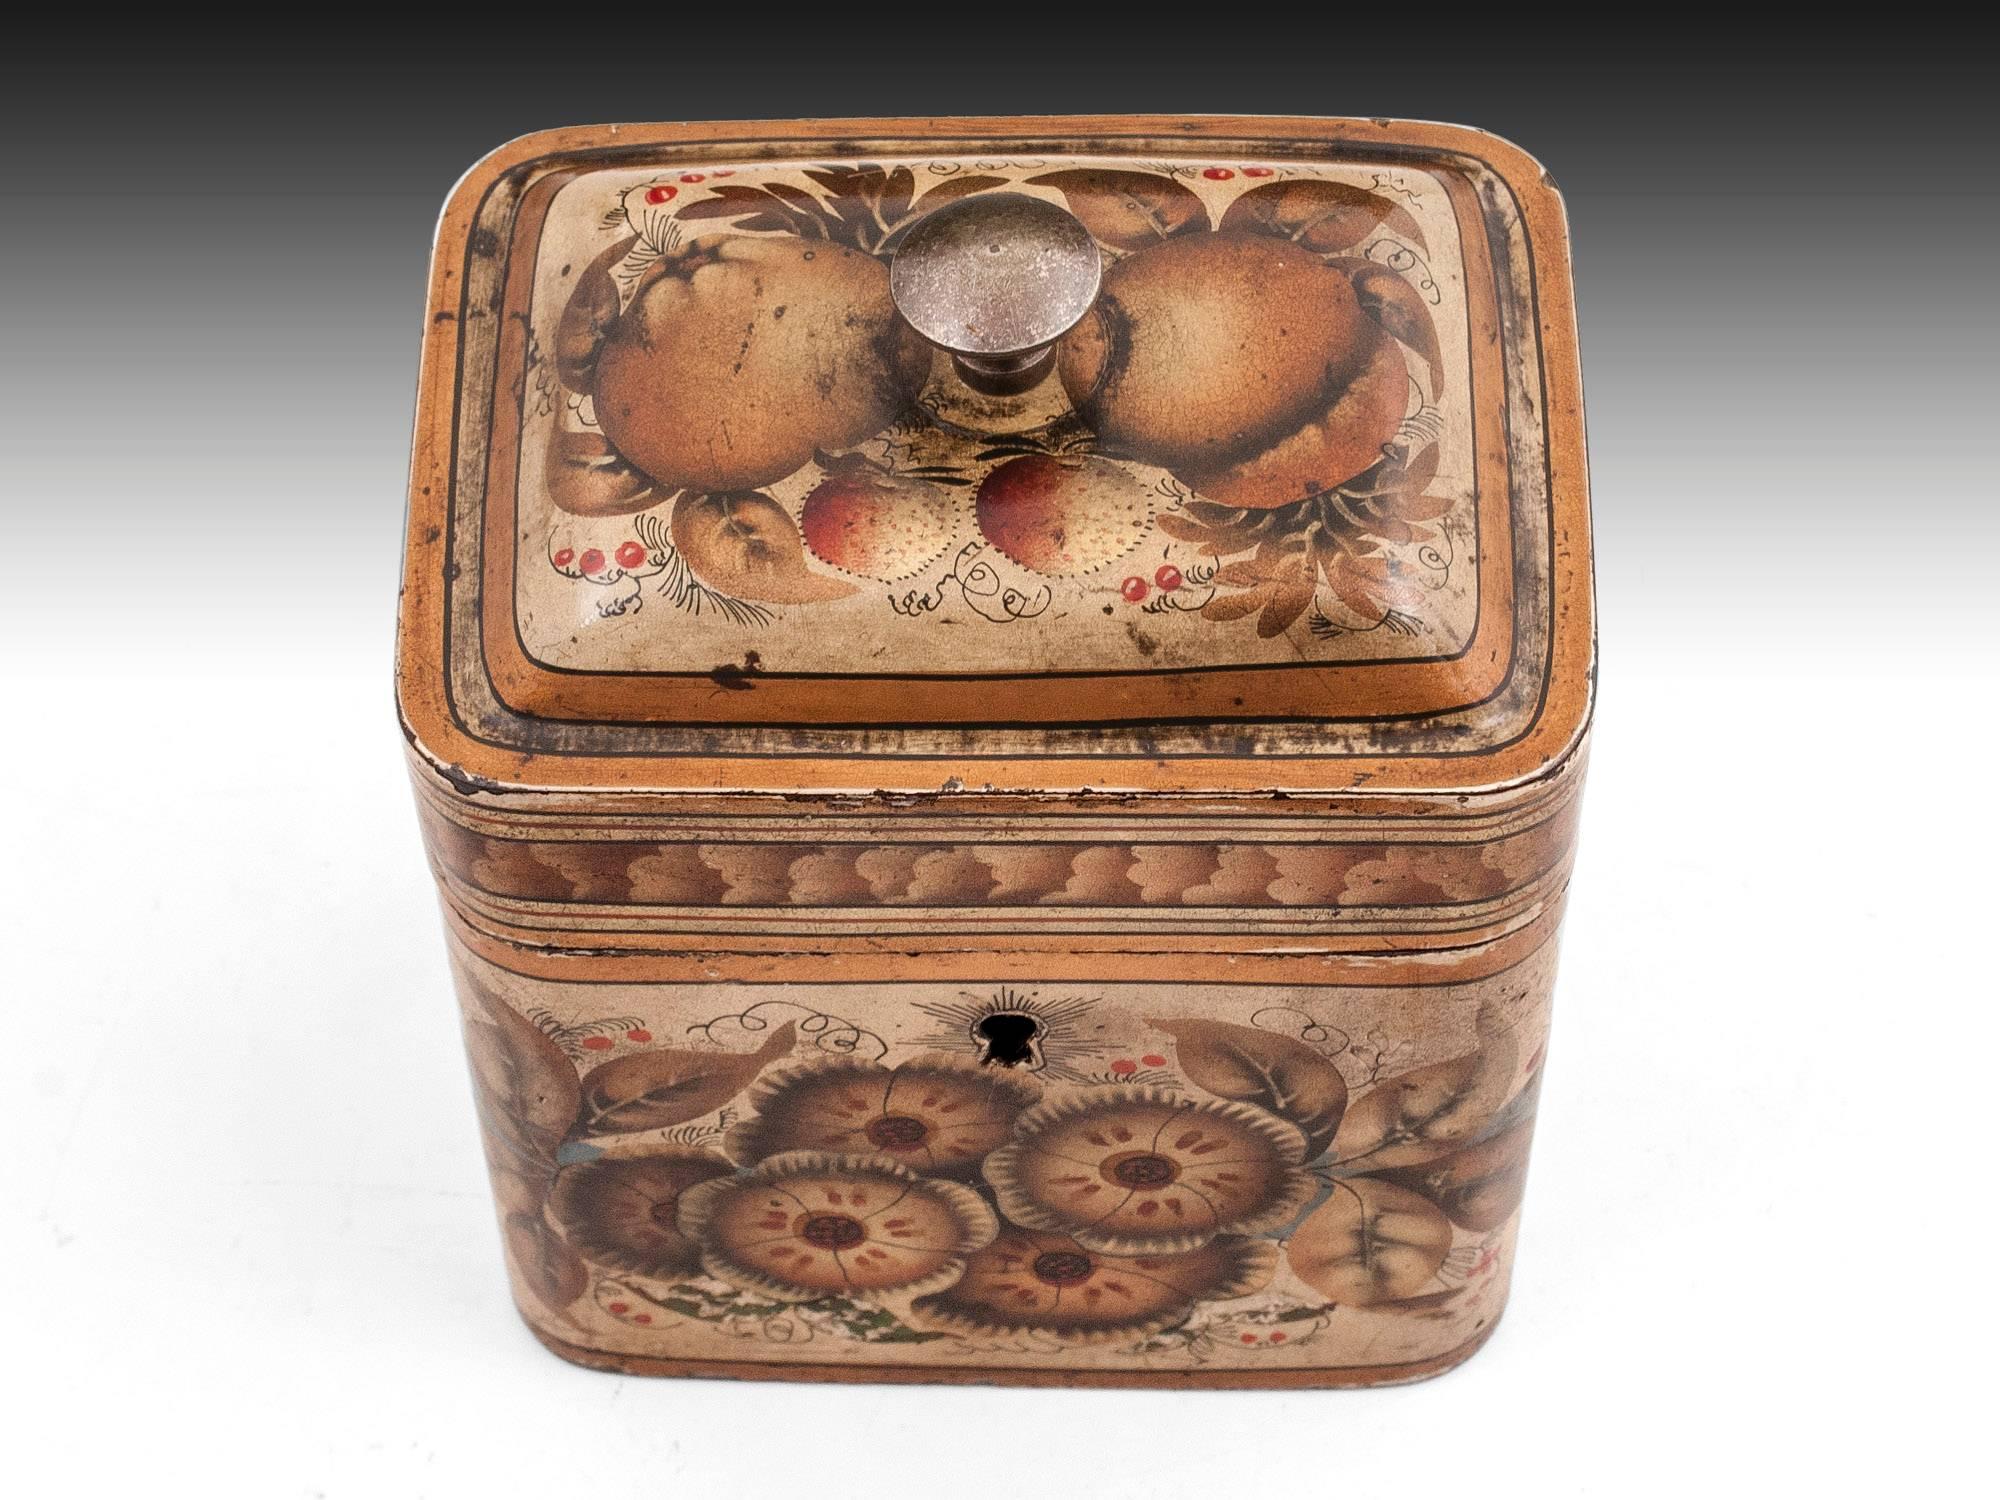 (This tea caddy is currently on display at  “A Tea Journey: from Mountain to the Table” at Compton Verney until the 22nd september.)
Toleware Tea caddy decorated with beautiful floral designs with blue ribboned swags and bold stripes of gold, black